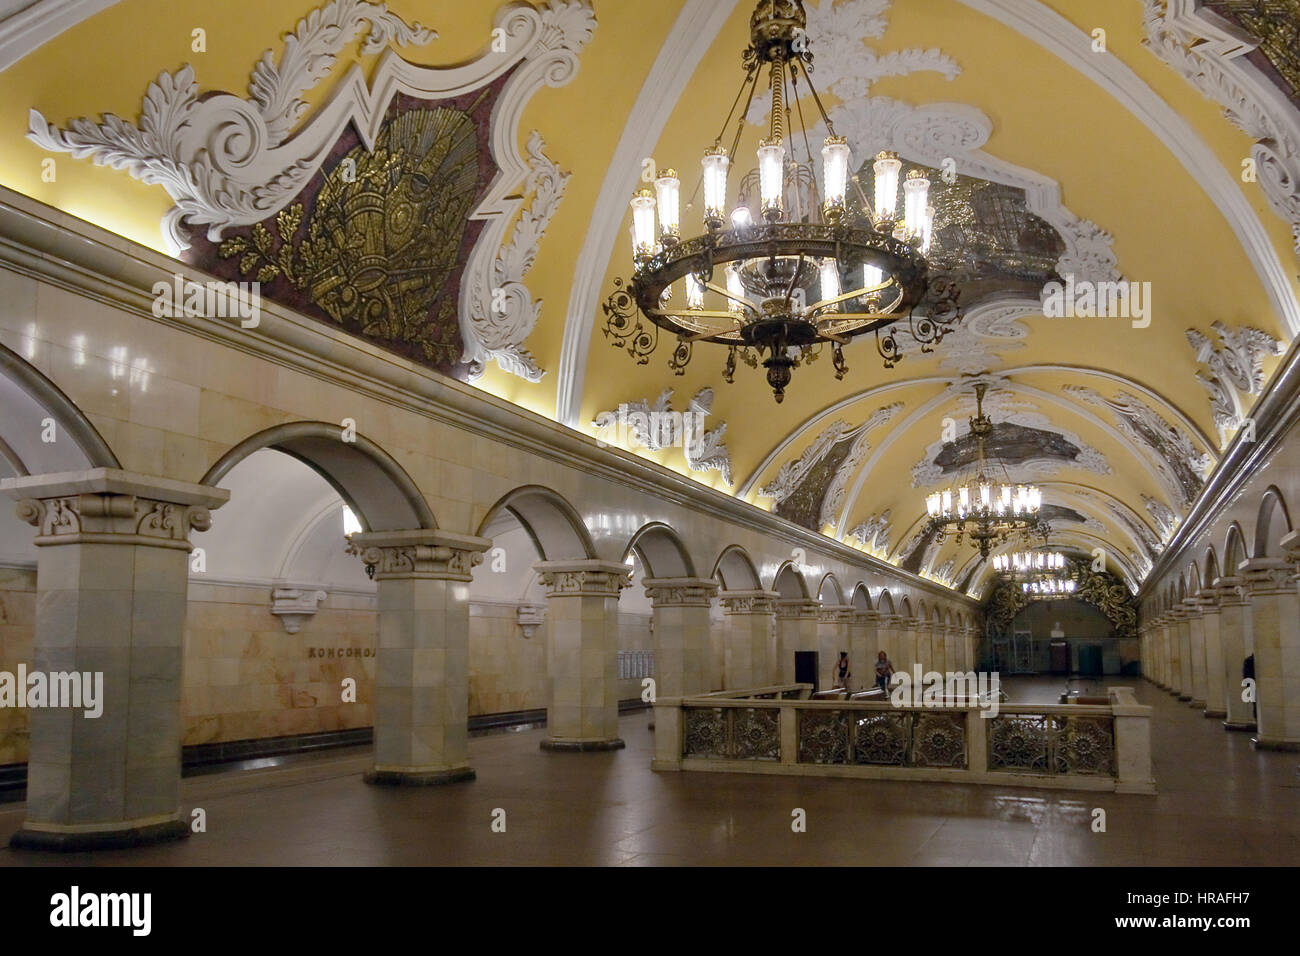 Moscow, Russian Federation - July 24, 2012: The Moscow metro station Komsomolskaya. With the grandiose painted yellow and the ceiling decorated with s Stock Photo